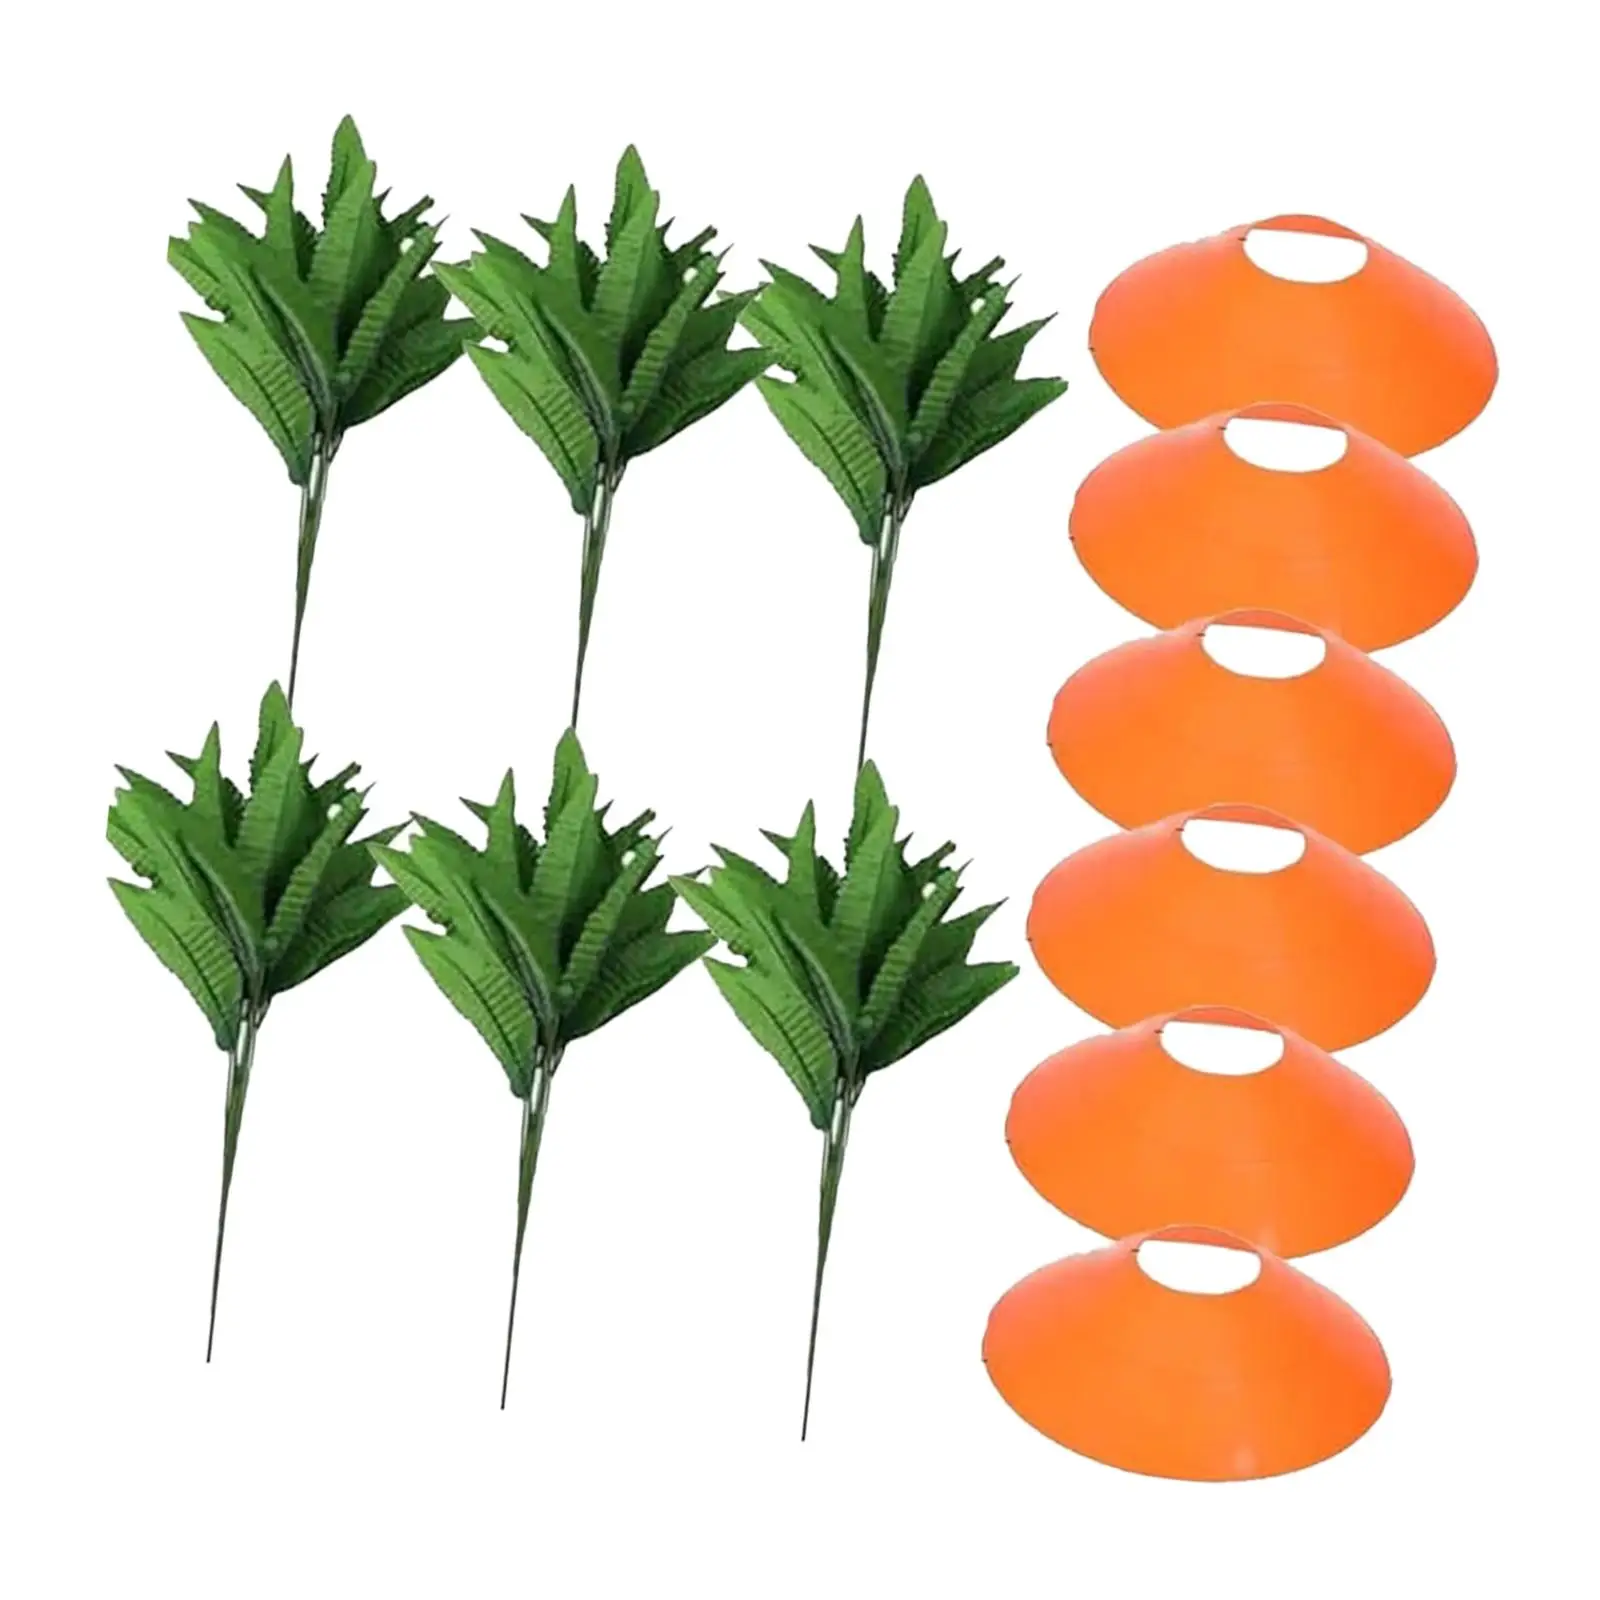 6 Pieces Carrot Decorative Yard Stakes Easter Decor Easter Carrot Garden Stakes for Patio Home Plant Lover Pathway Decorative